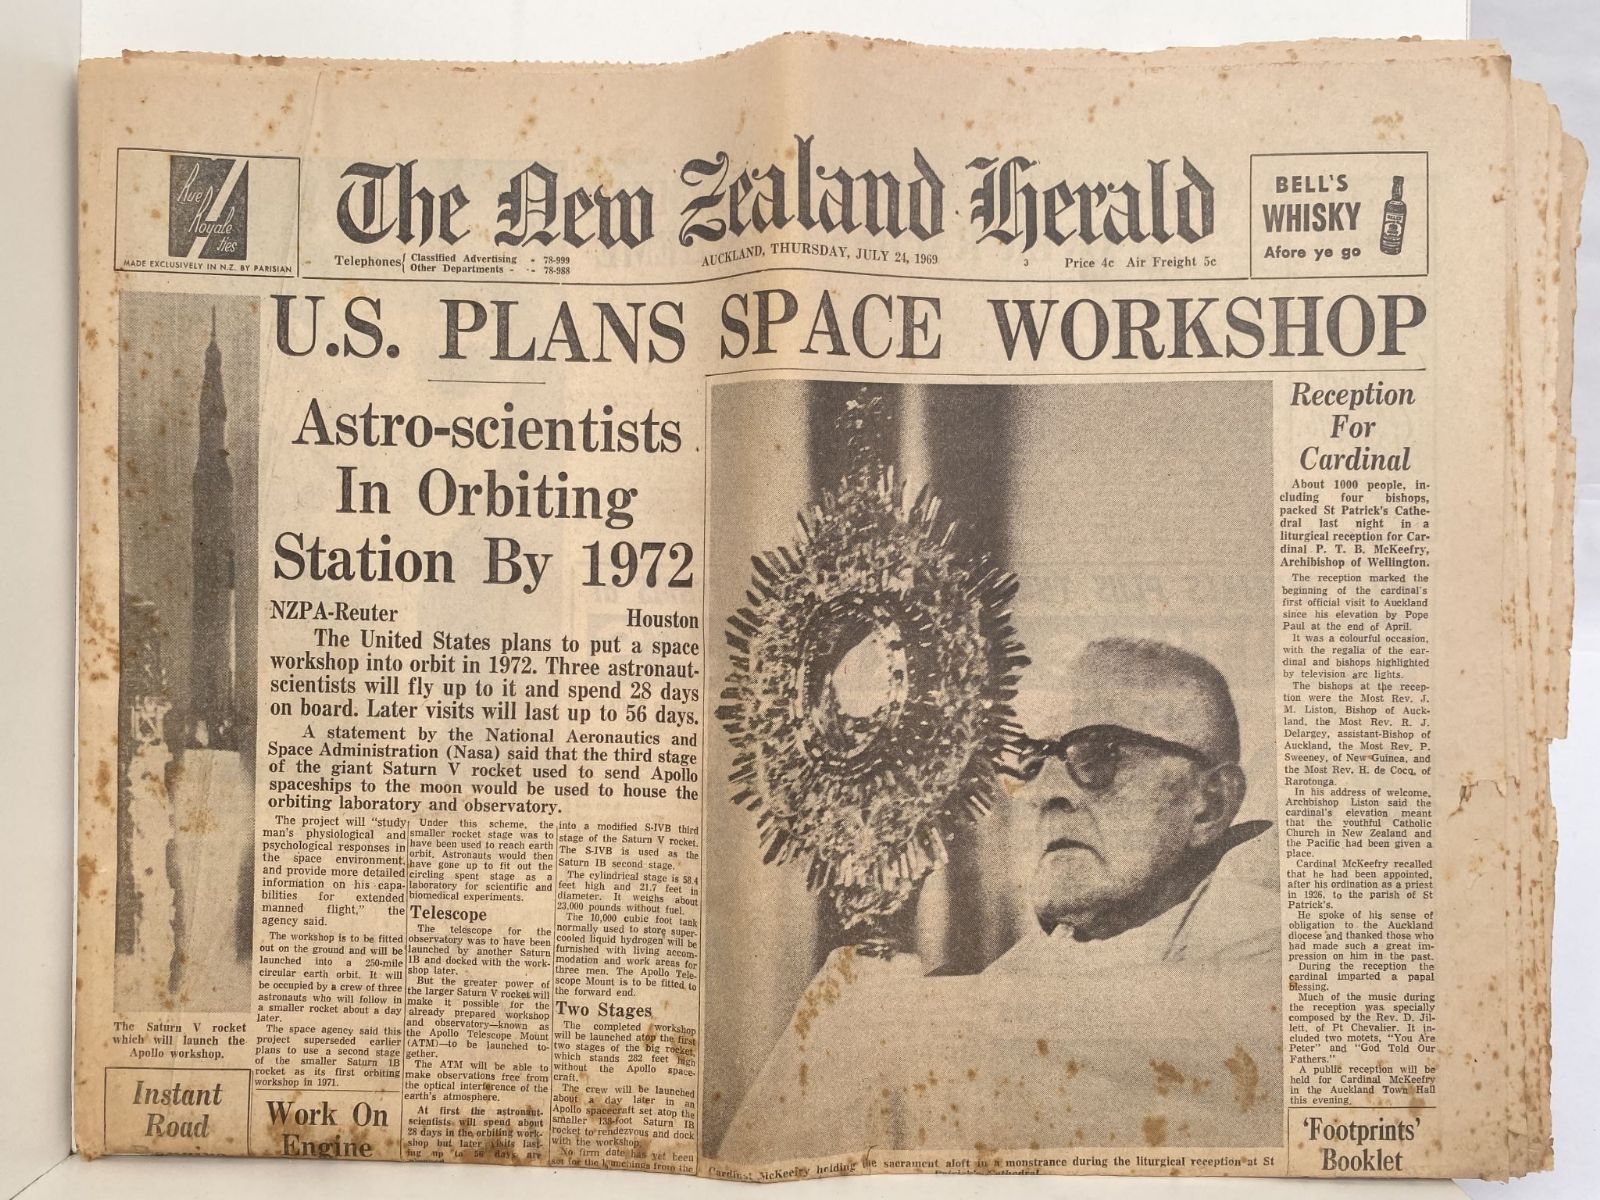 OLD NEWSPAPER: The New Zealand Herald, July 24th 1969 - Moon Landing Special